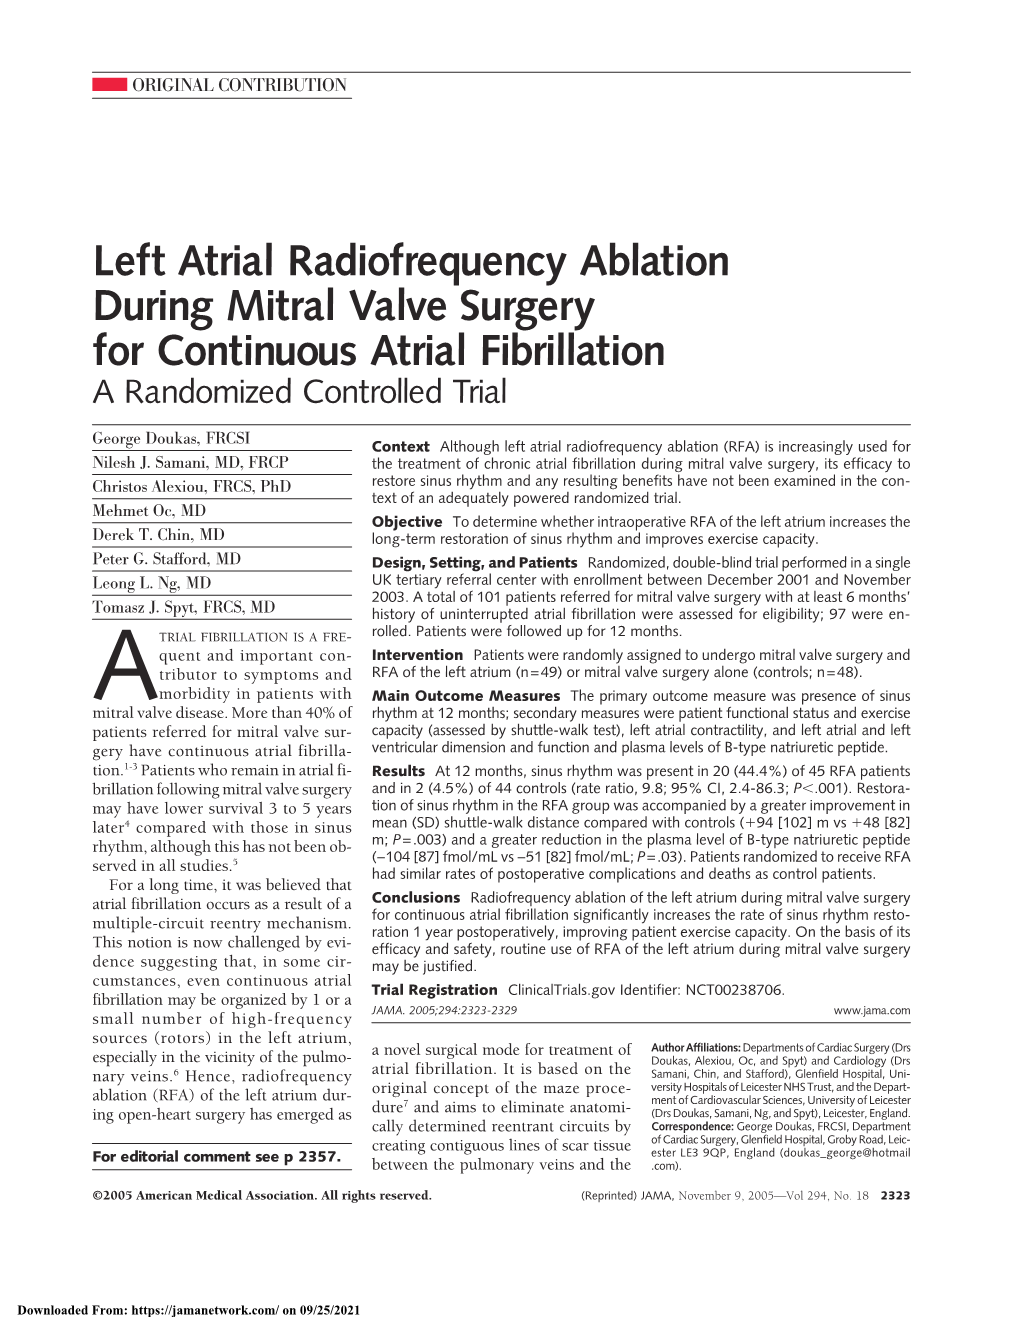 Left Atrial Radiofrequency Ablation During Mitral Valve Surgery for Continuous Atrial Fibrillation a Randomized Controlled Trial